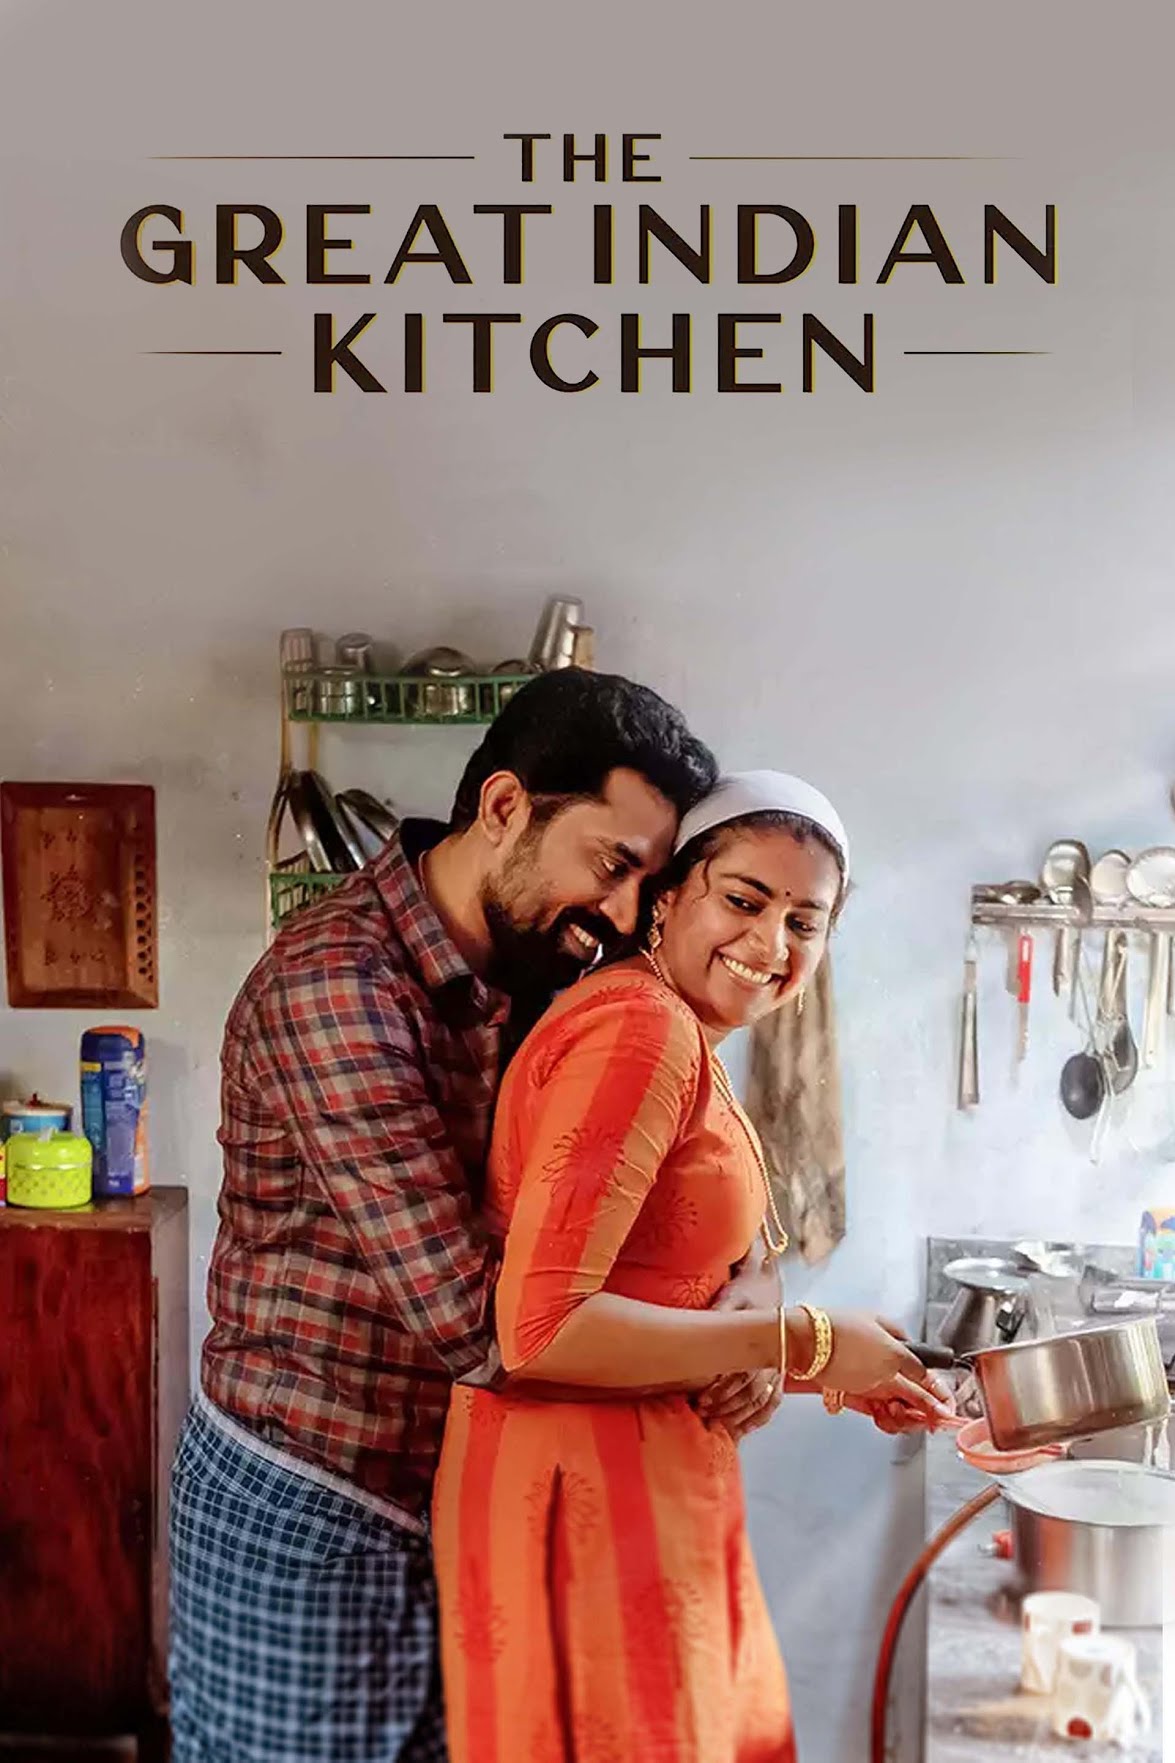 The Great Indian Kitchen 2021 HQ Hindi Dubbed 1080p HDRip 1.44GB Download